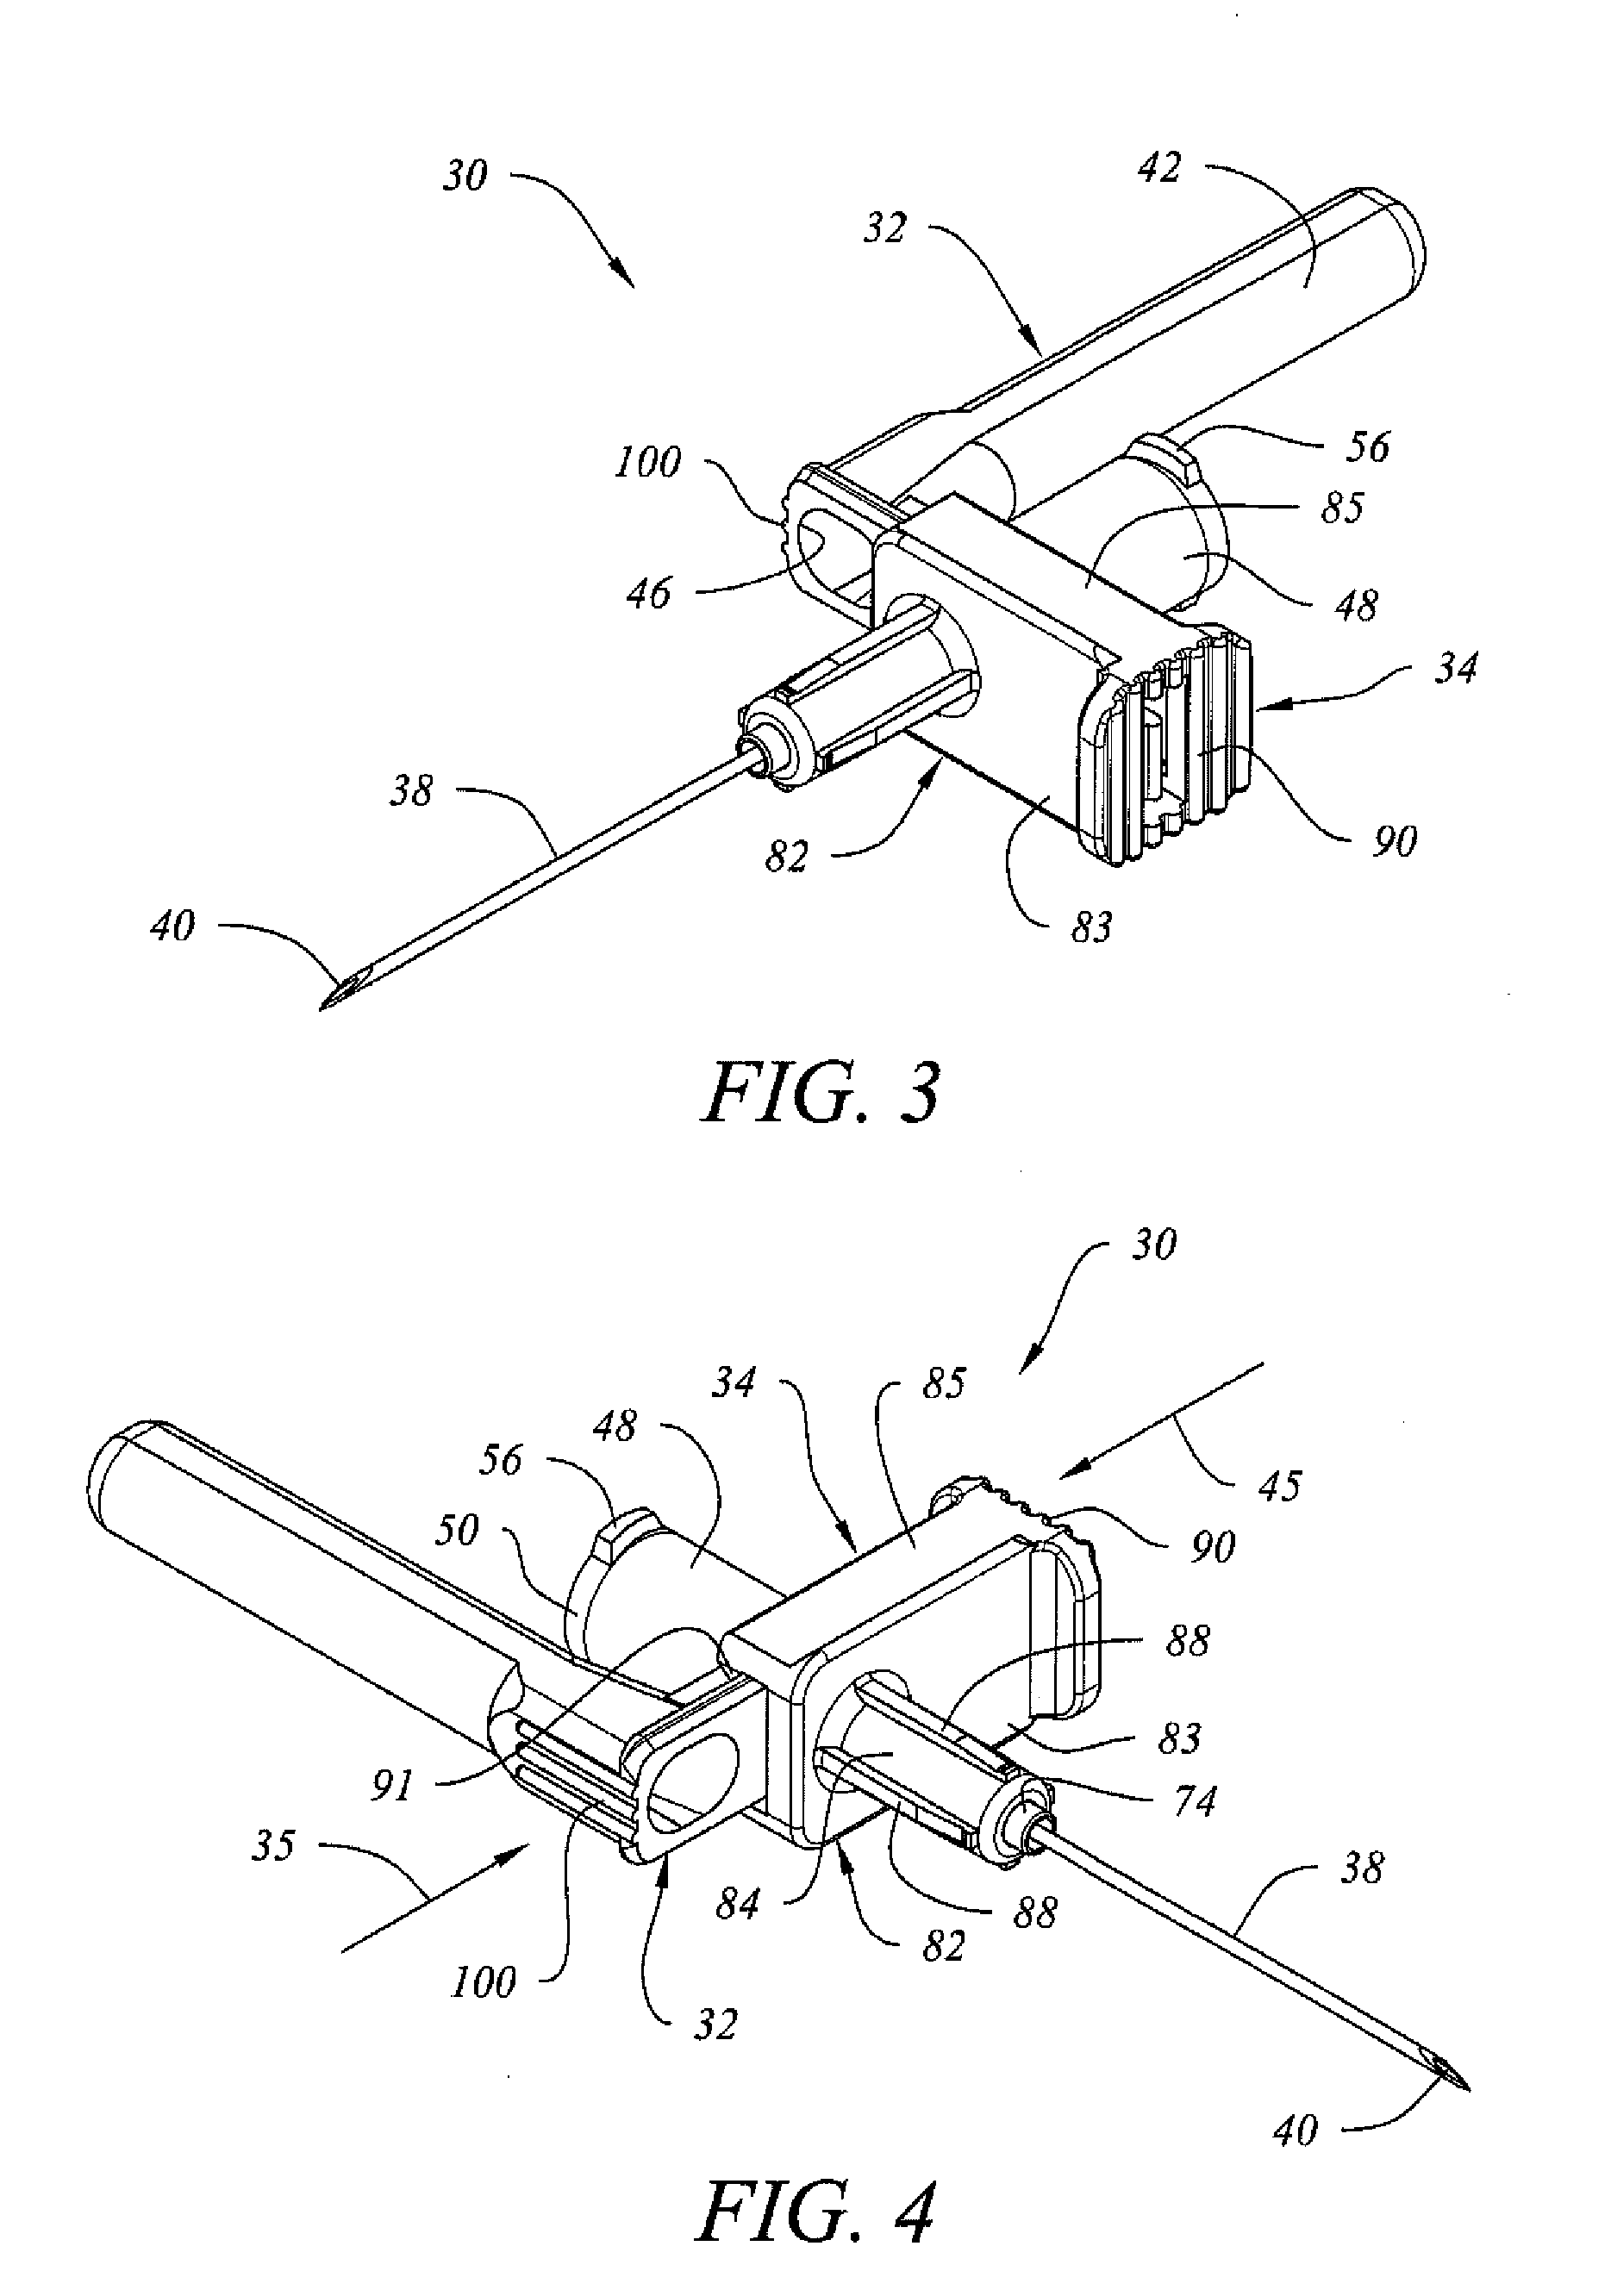 Medical Device with Sliding Frontal Attachment and Retractable Needle